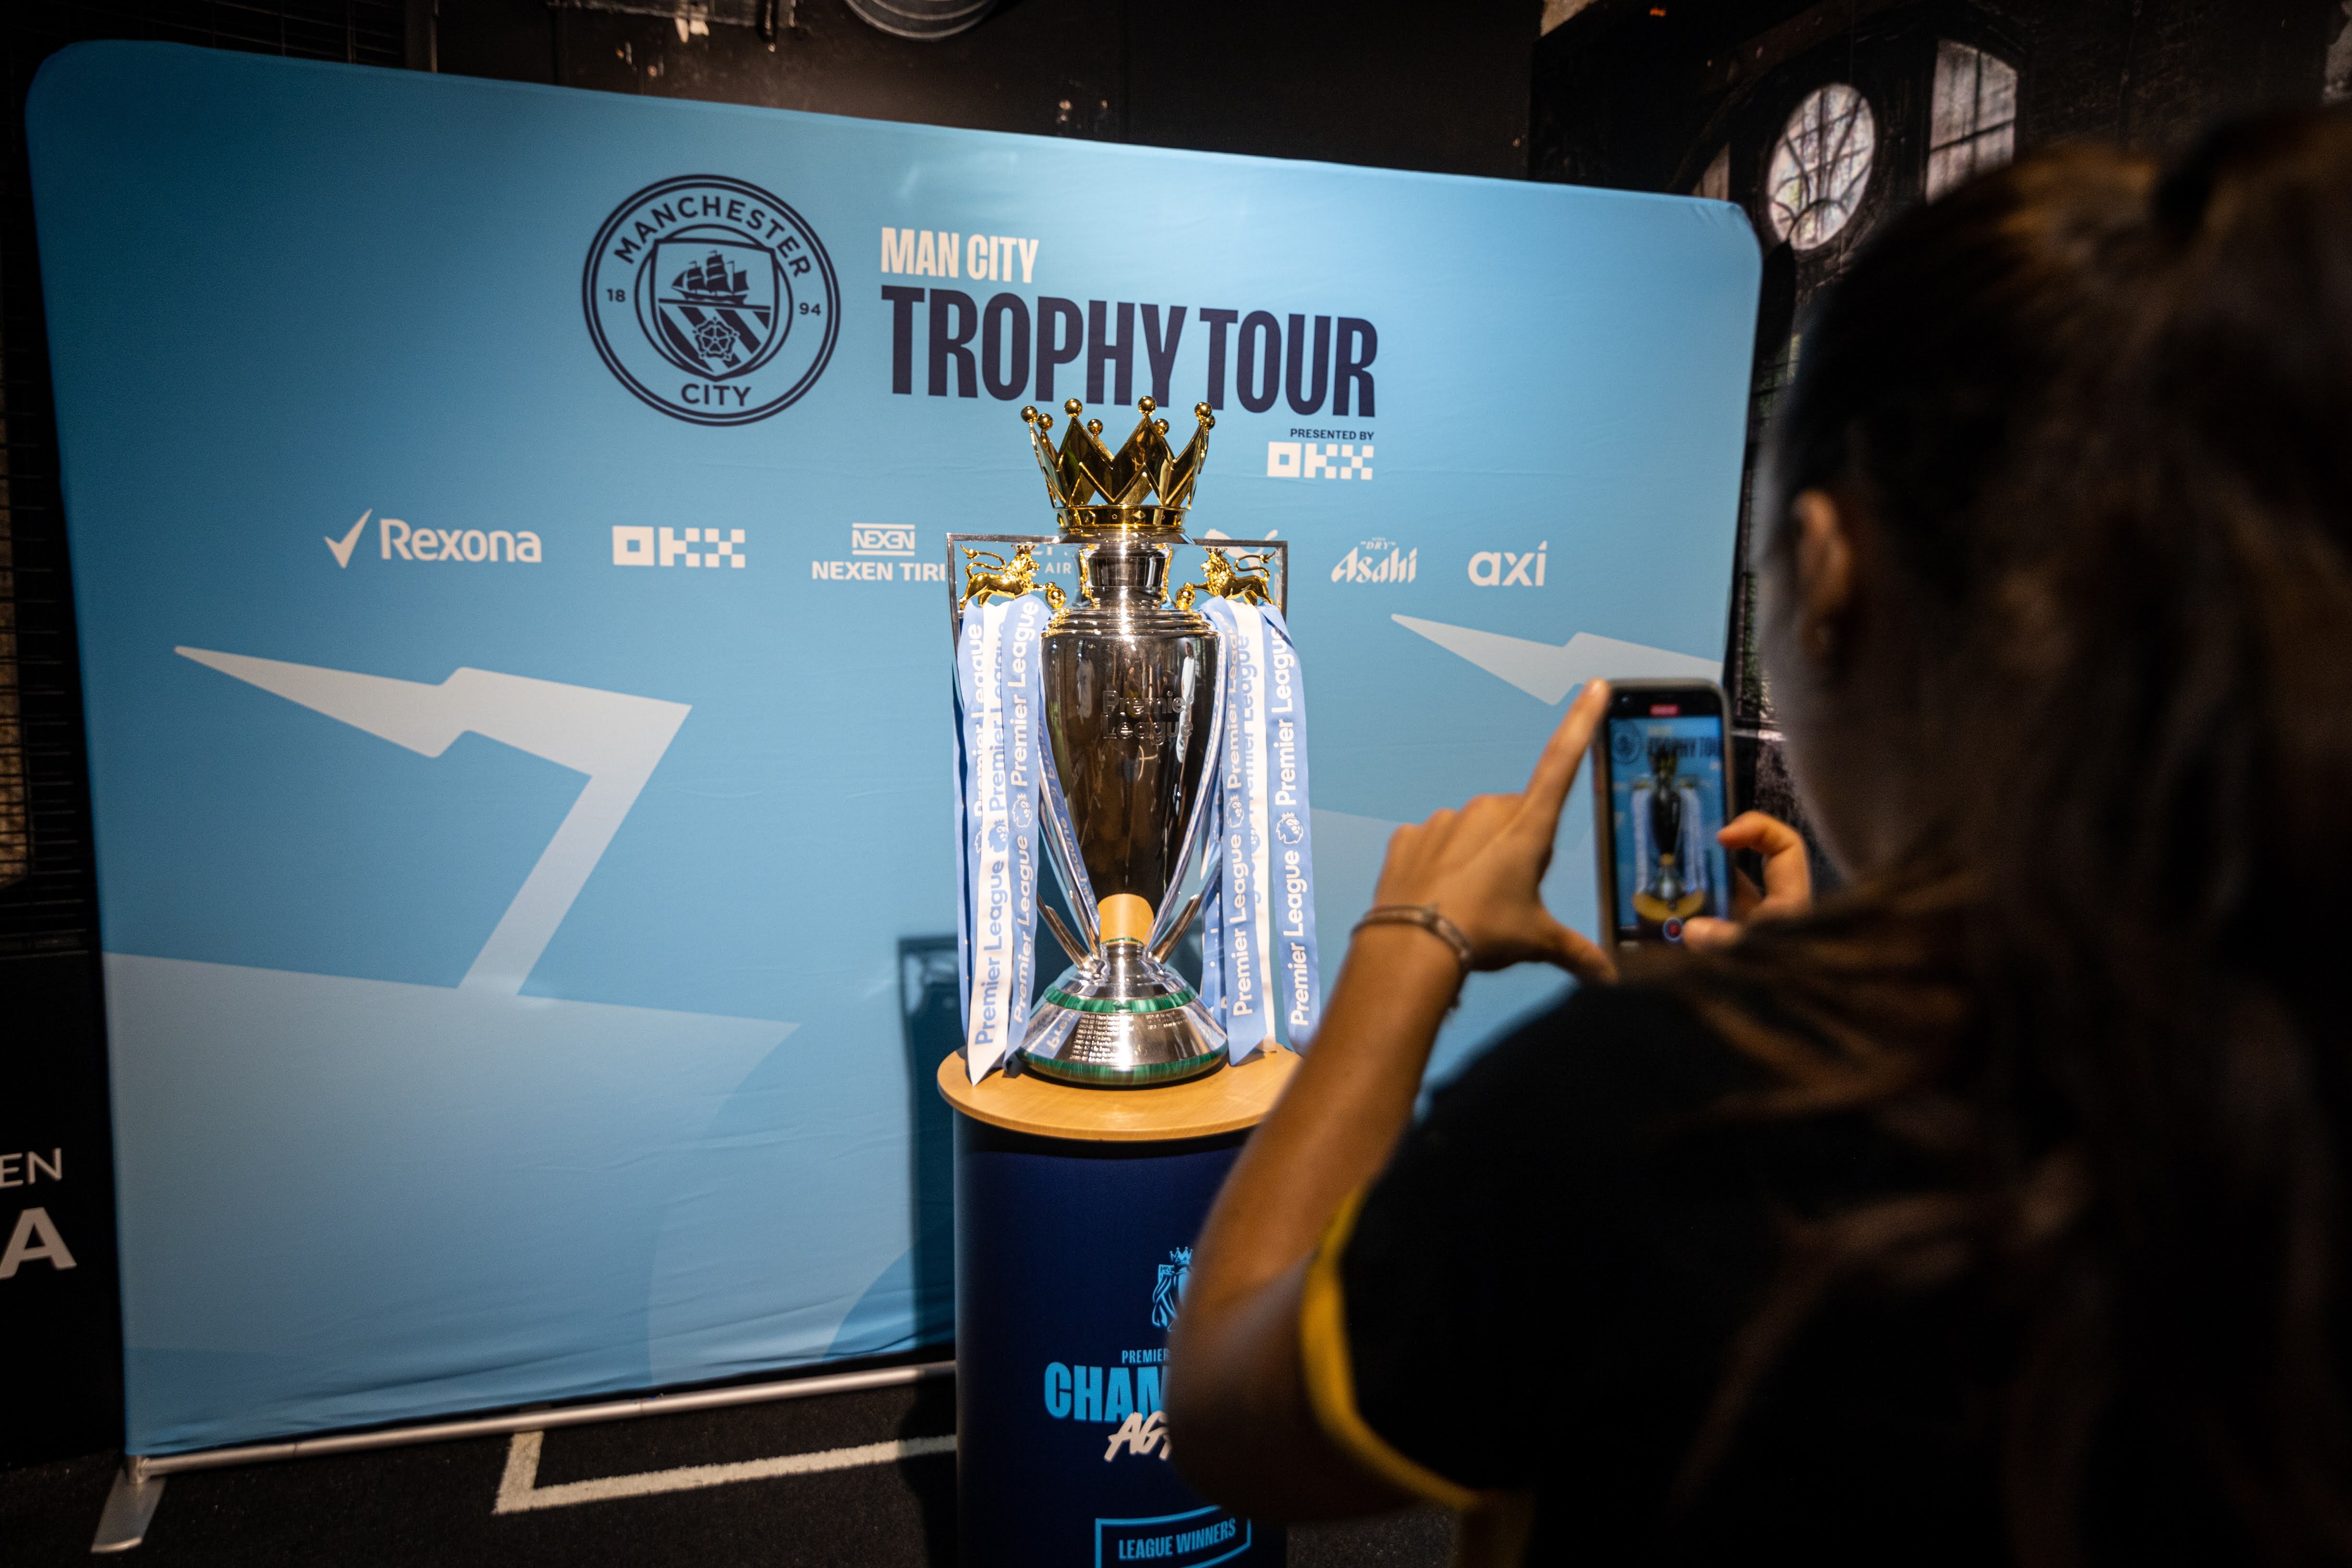 Manchester City Global Trophy Tour 2022